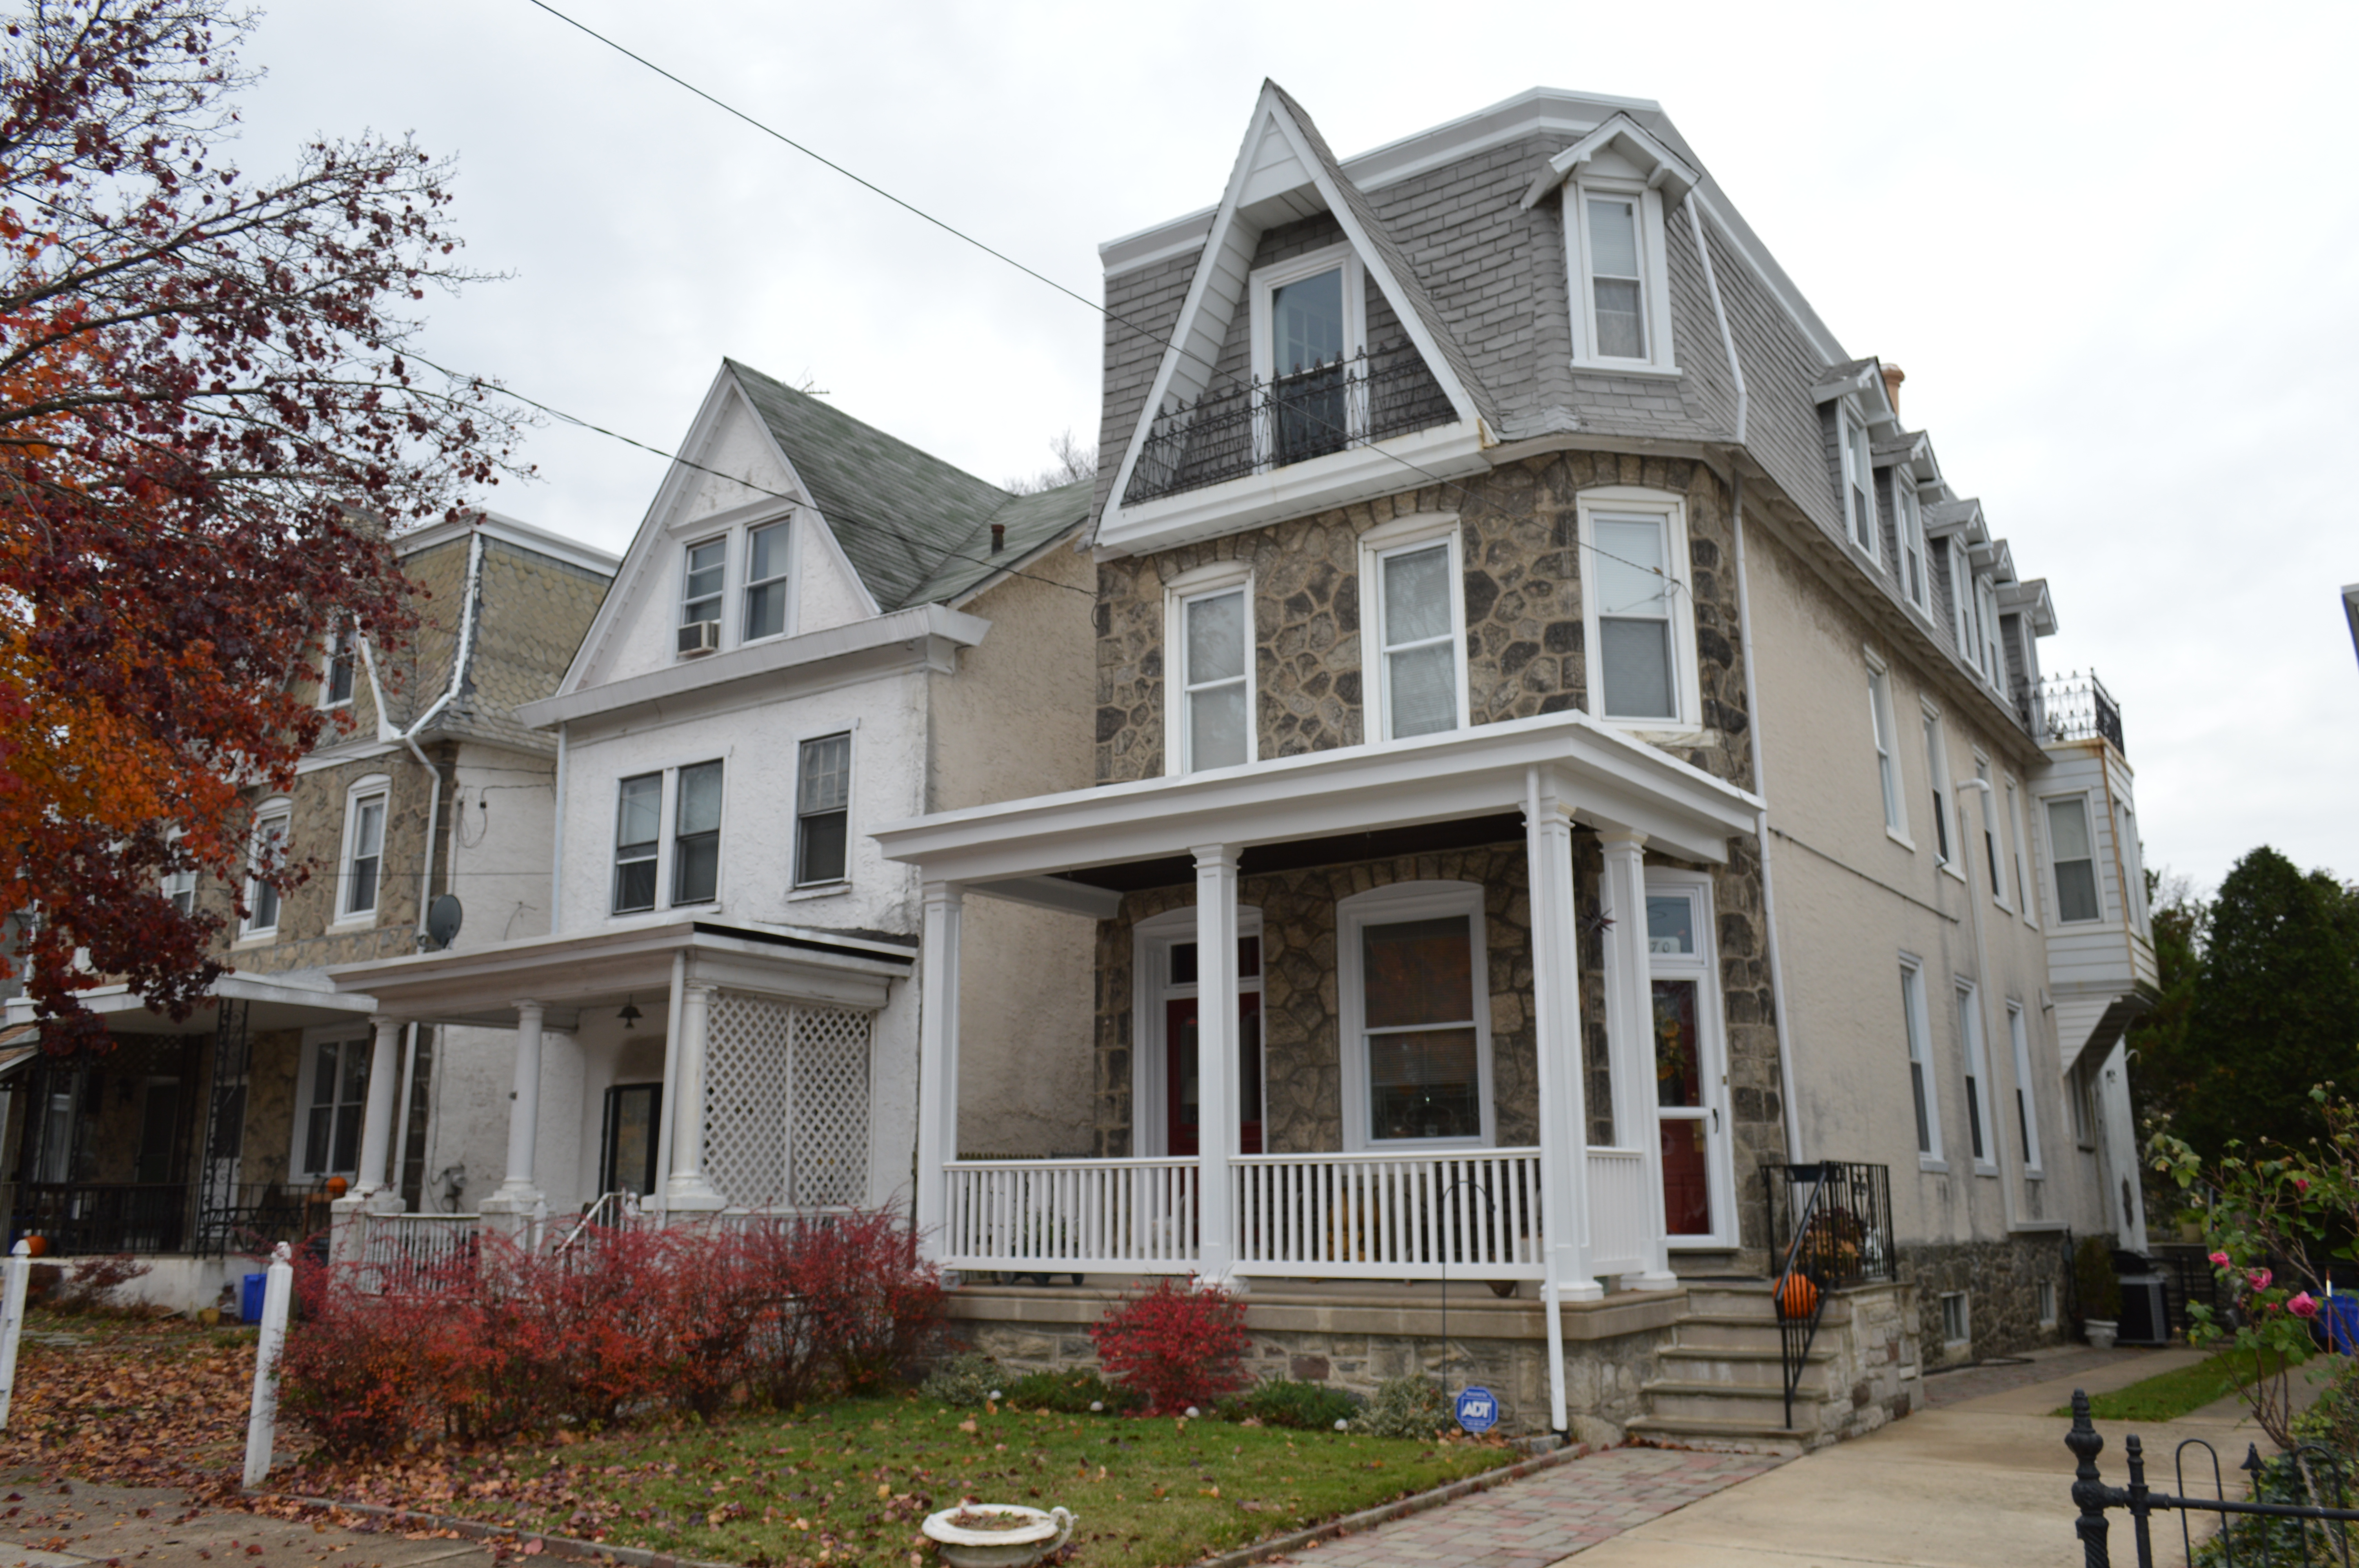 Victorian-Era style twins and single family homes characterize the 400 block of Lyceum Ave.